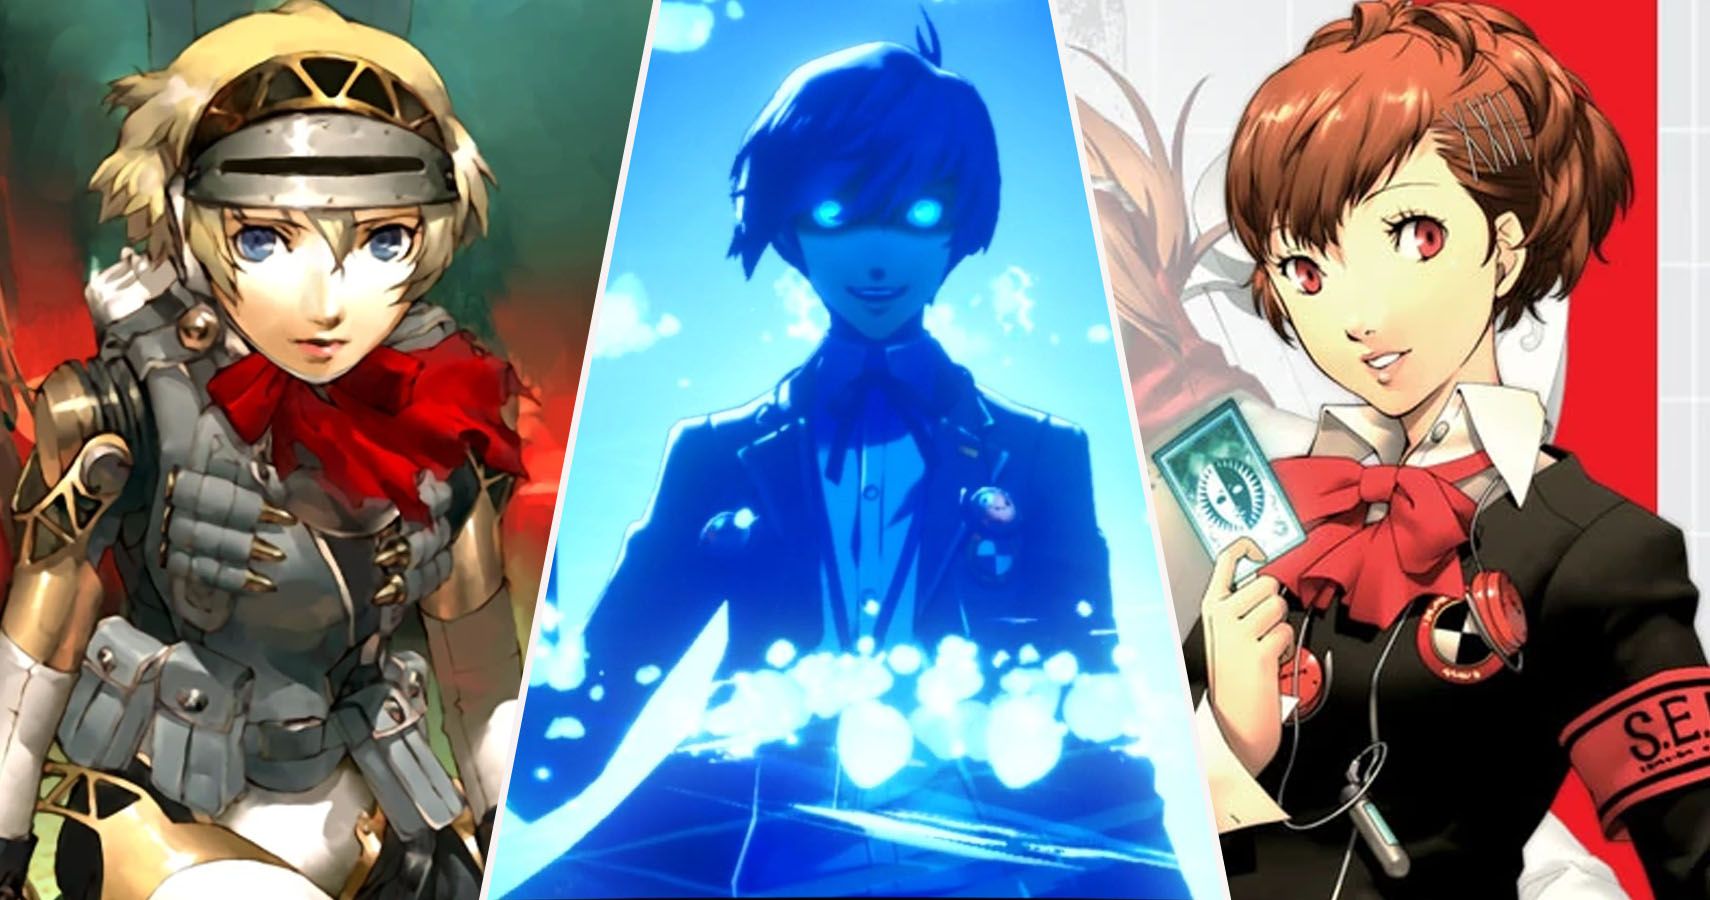 Persona 3 Fans Upset As Remake Cuts Female Protagonist